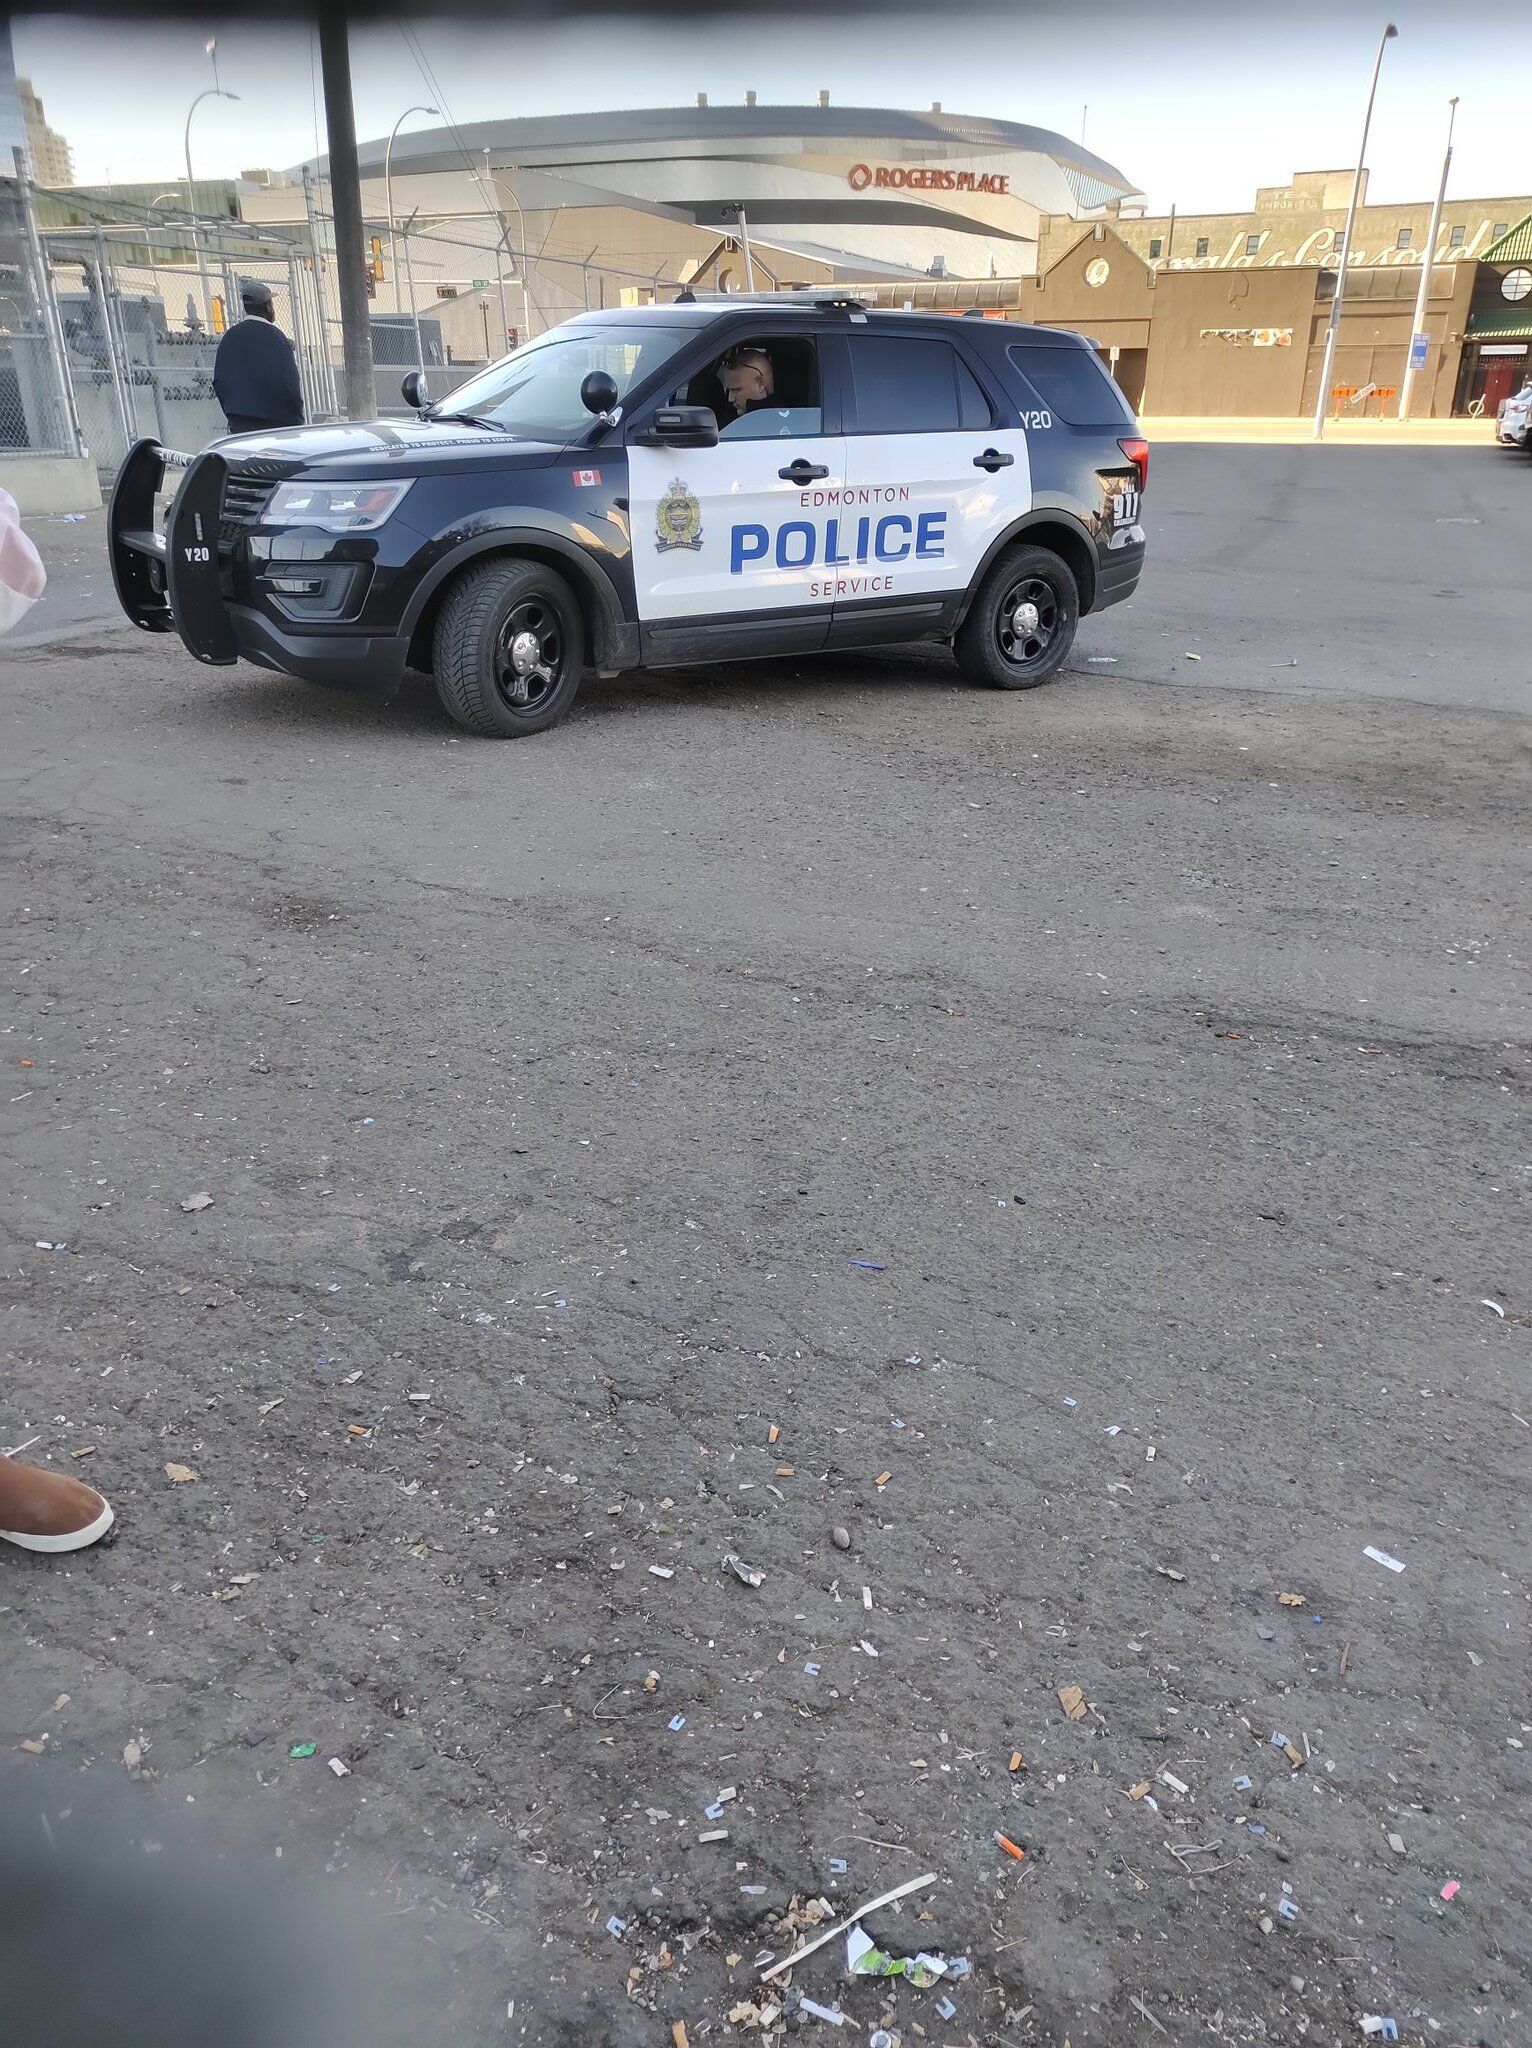 Cop sitting in his cop car, downtown, in an empty parking lot.